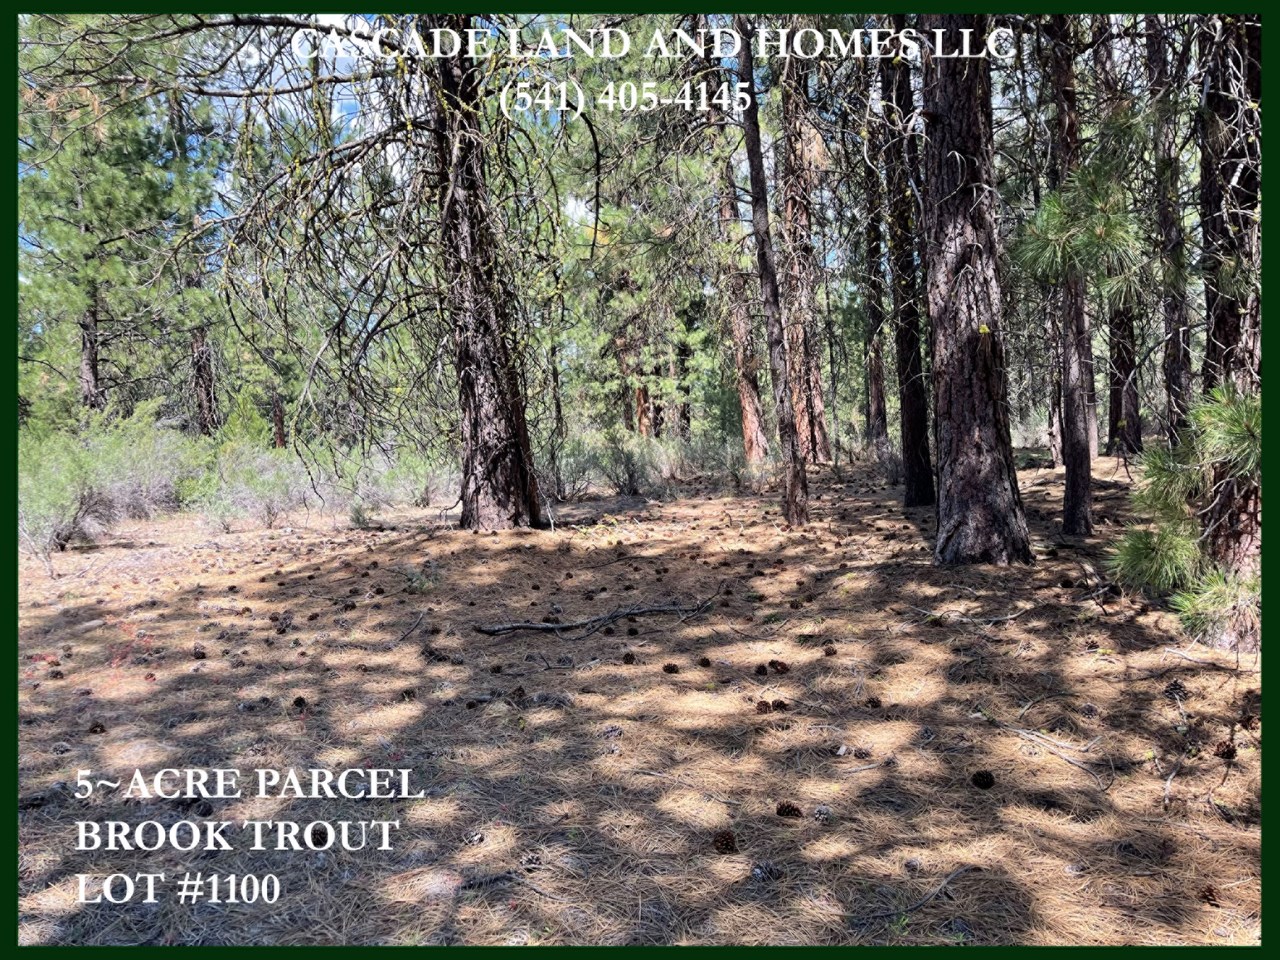 this large 5-acre property is heavily treed, and covered in native vegetation, sage, rabbit brush, and grasses. the tall pines offer privacy and shade in the warm summers. the property really gives you a feeling of privacy, and with five acres, you wouldn't have neighbors too close! this would be a great vacation spot to explore the surrounding area. it is also near hwy 97 for an easy commute to klamath falls! be sure and check with the county for zoning options. the property is currently zoned f, and would need to be okayed by the county before proceeding with the residential building process.